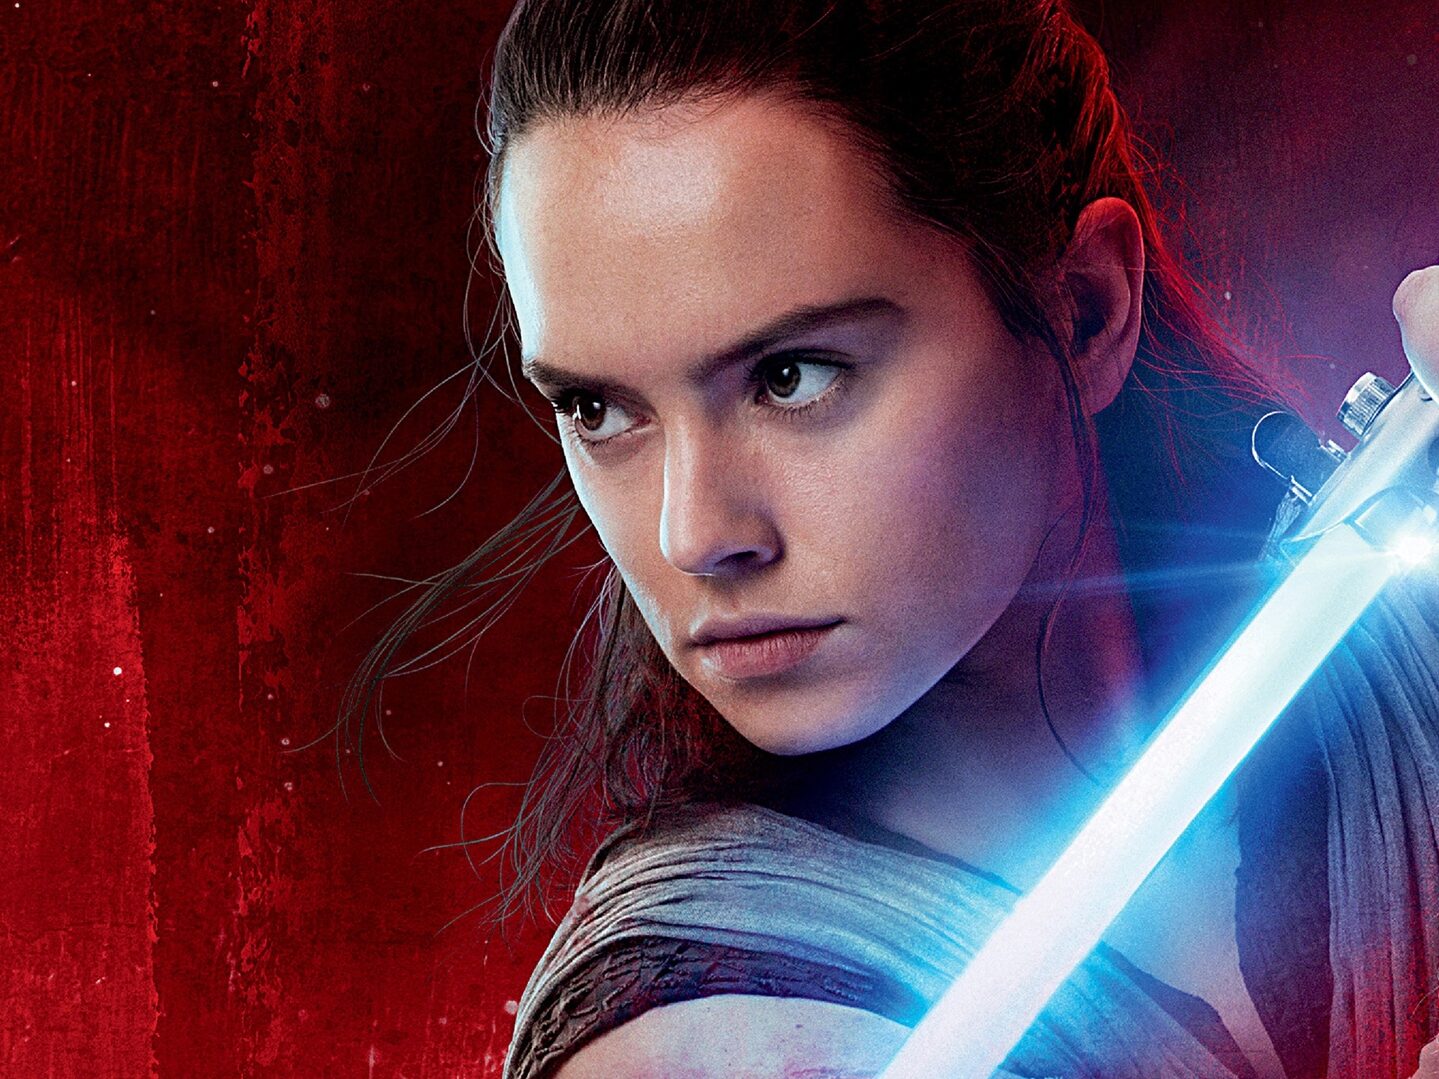 What's your favorite alternate Star Wars: The Last Jedi character